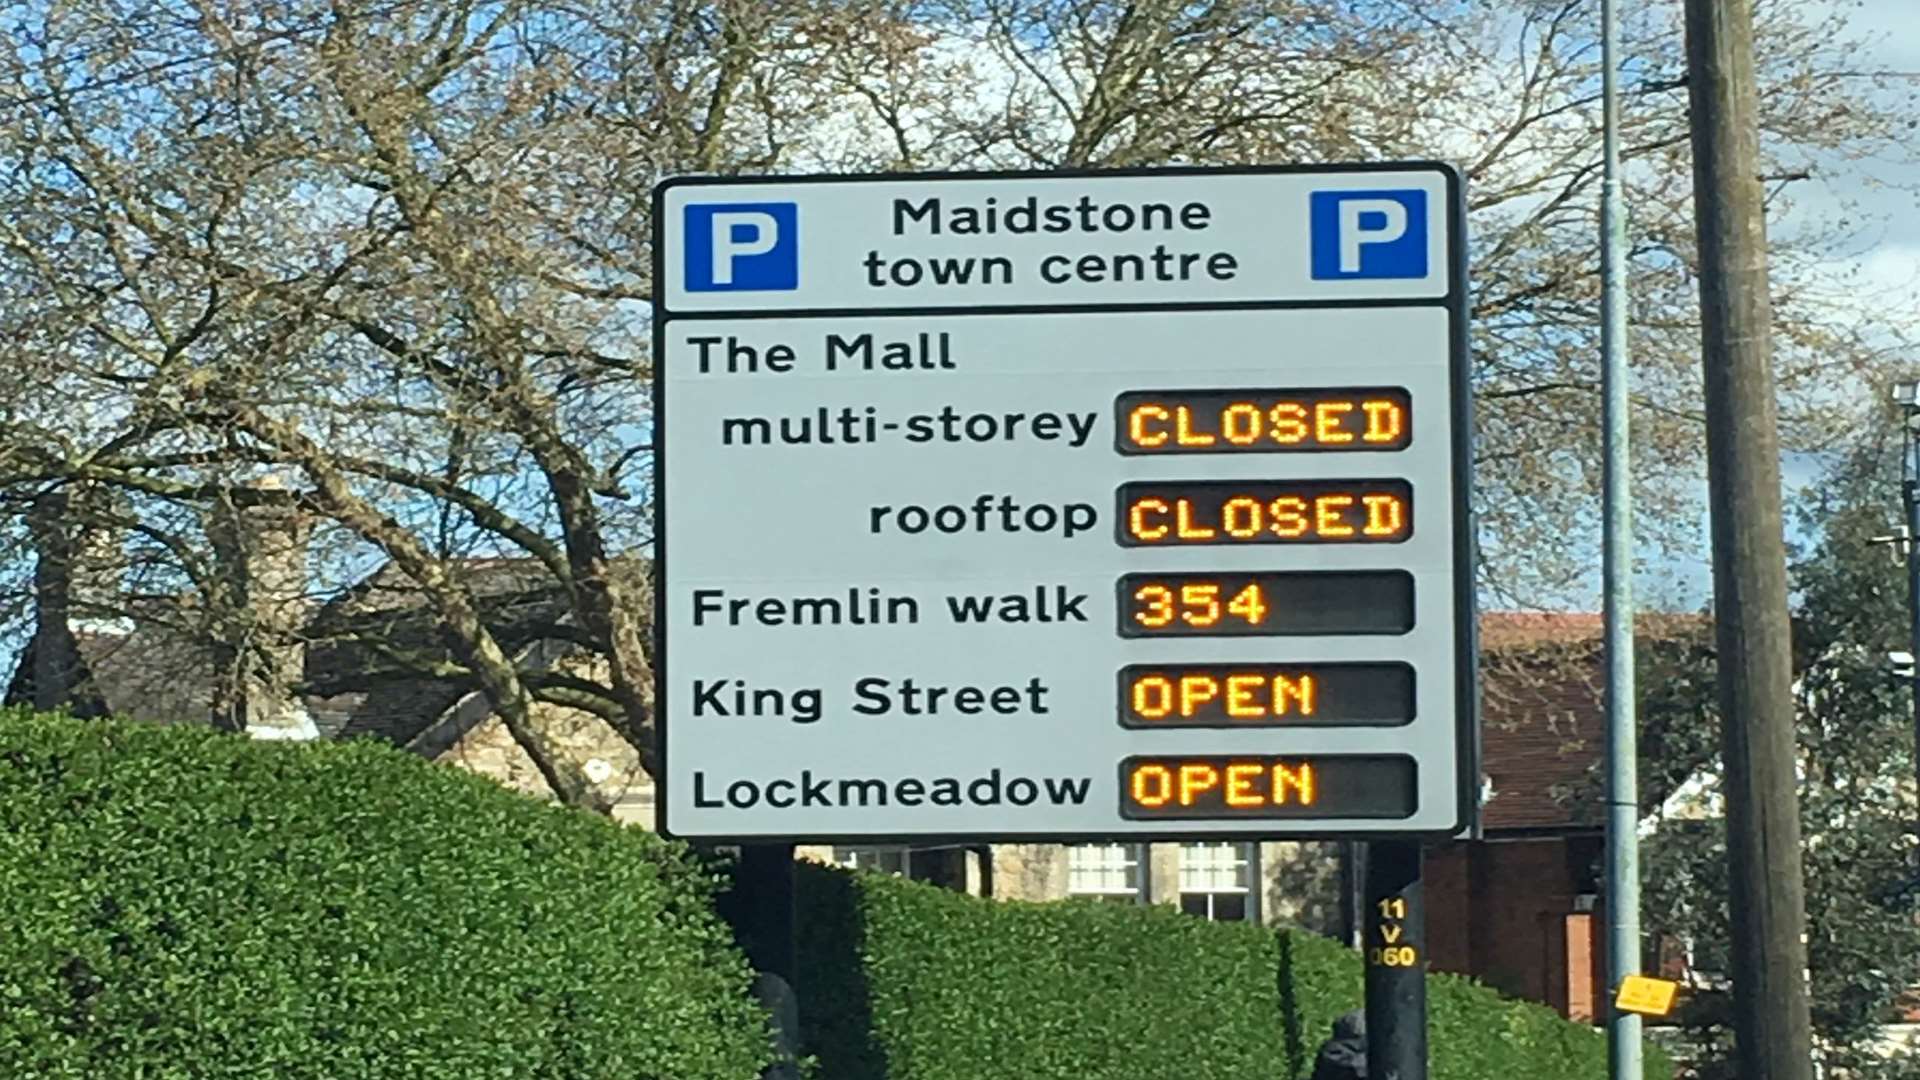 The car parks were closed while traffic queued around town